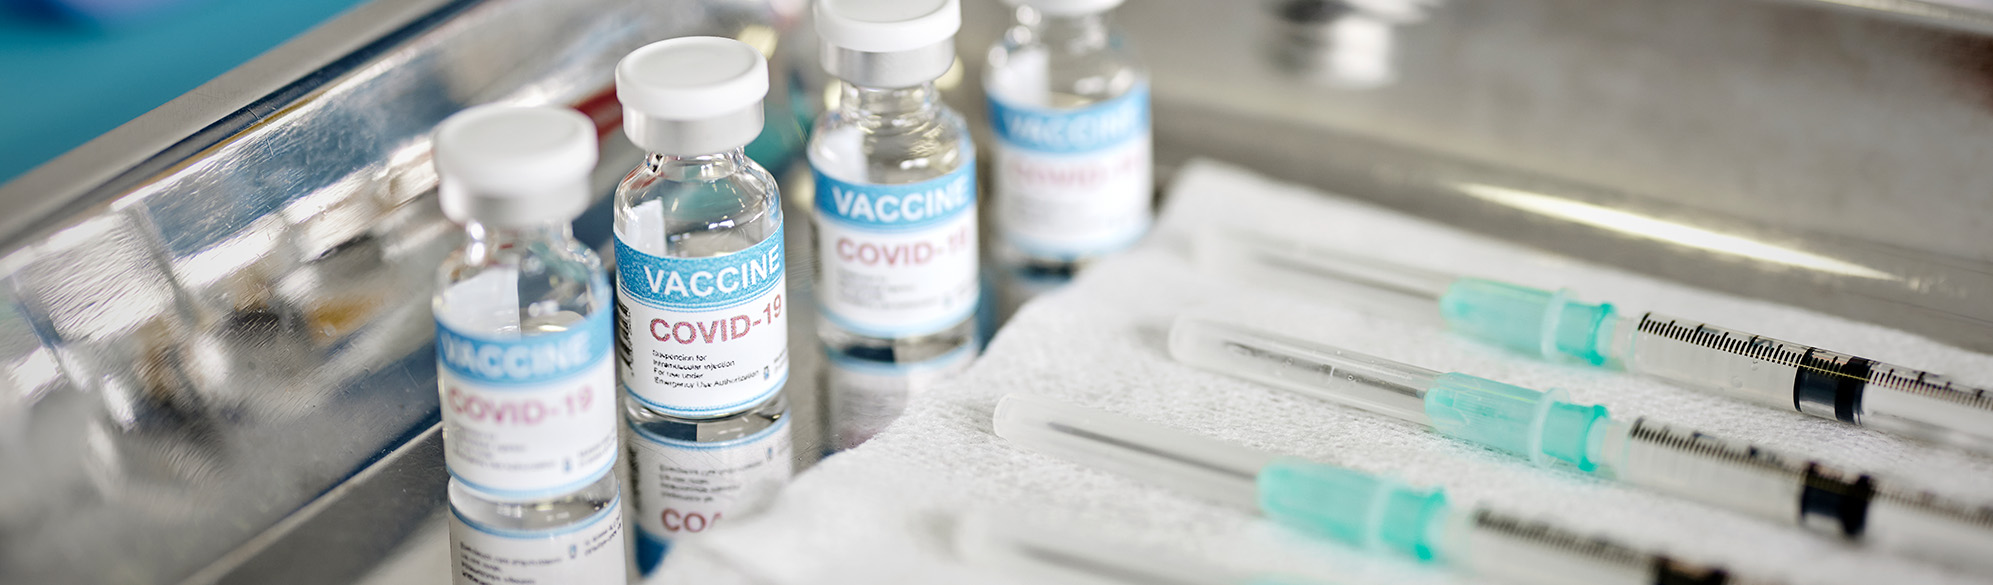 Photo: Image of COVID-19 vaccines and supplies